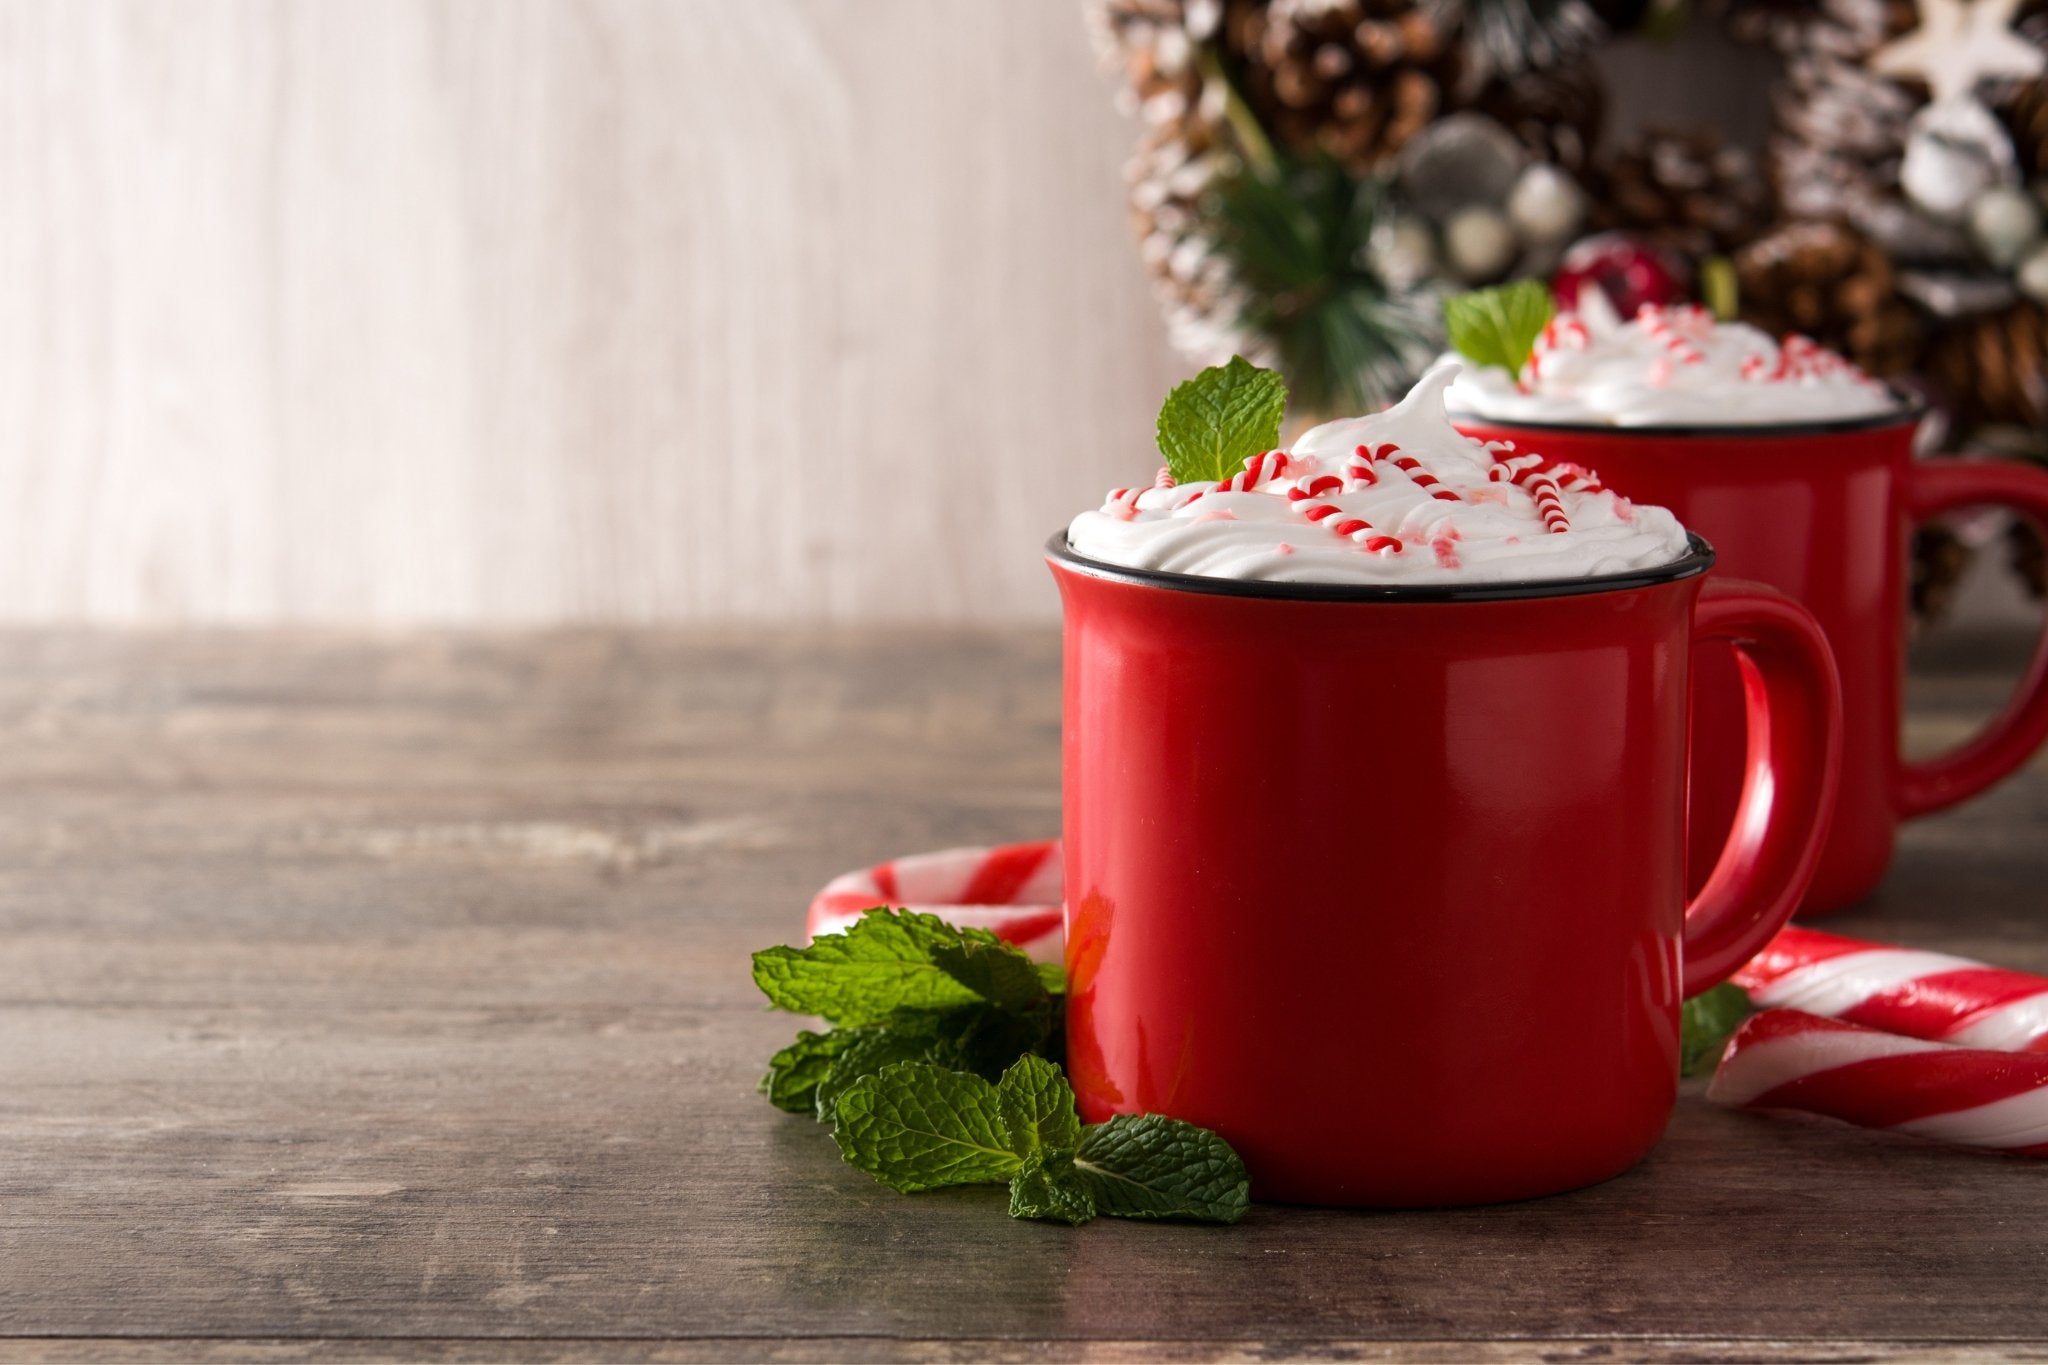 Peppermint Mocha Latte Without The Tummy Ache: The Holiday Classic Made With A Rich, Smooth Puehr - Loose Leaf Tea Market